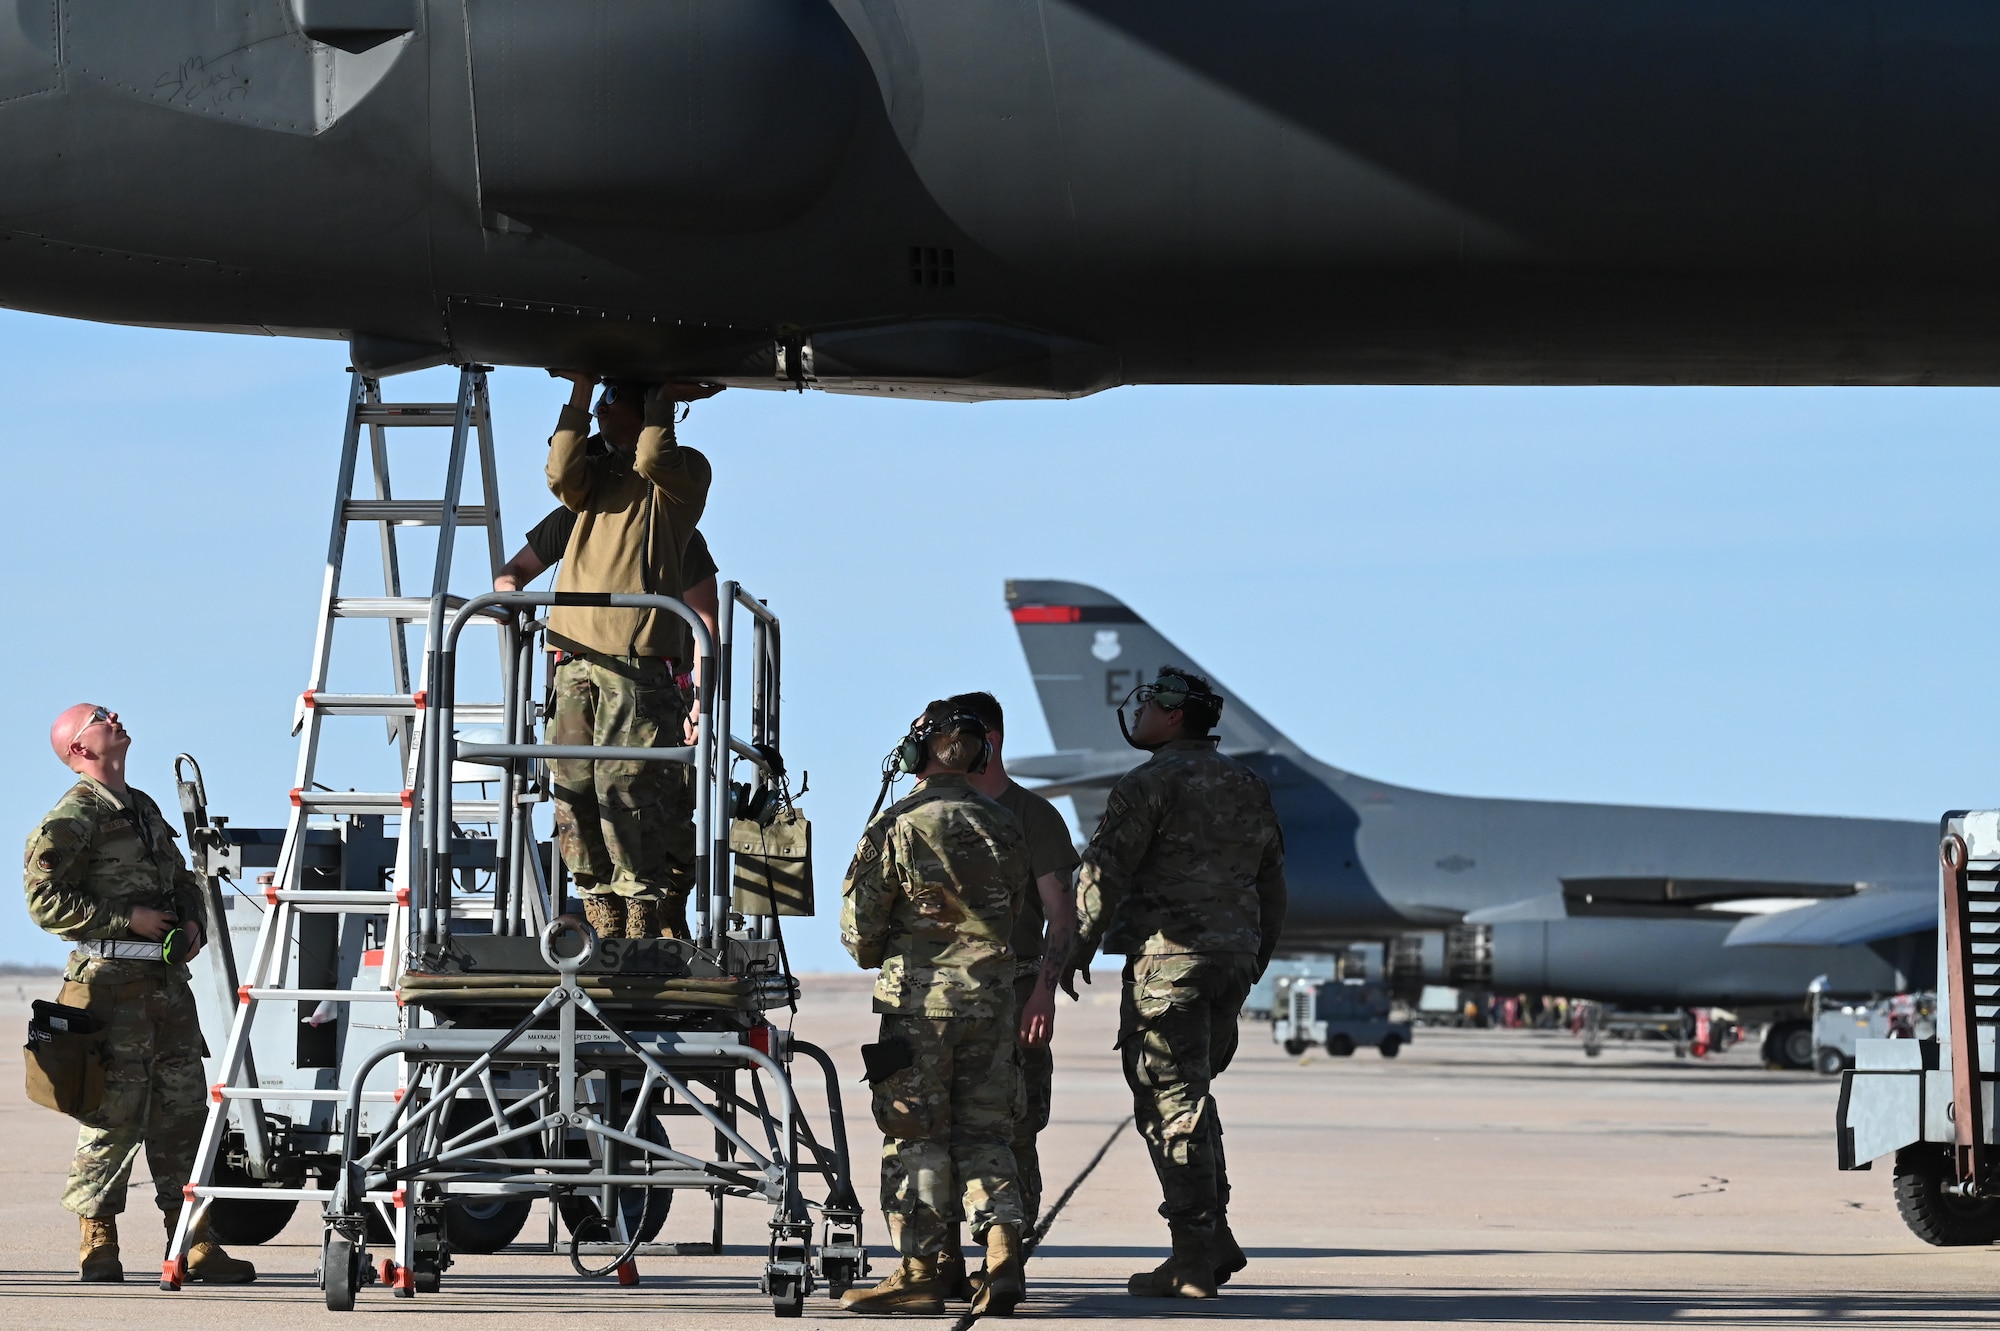 Airmen from the 28th Maintenance Group, Ellsworth Air Force Base, South Dakota, and the 7th MXG perform preflight maintenance on a B-1B Lancer on the flightline at Dyess AFB, Texas, Feb. 1, 2024. Ellsworth Air Force Base B-1Bs recently launched from Dyess Air Force Base to support U.S. Central Command priorities, validating the United States Air Force capability to provide precision, long-range strike anytime, anywhere. (U.S. Air Force photo by Staff Sgt. Holly Cook)